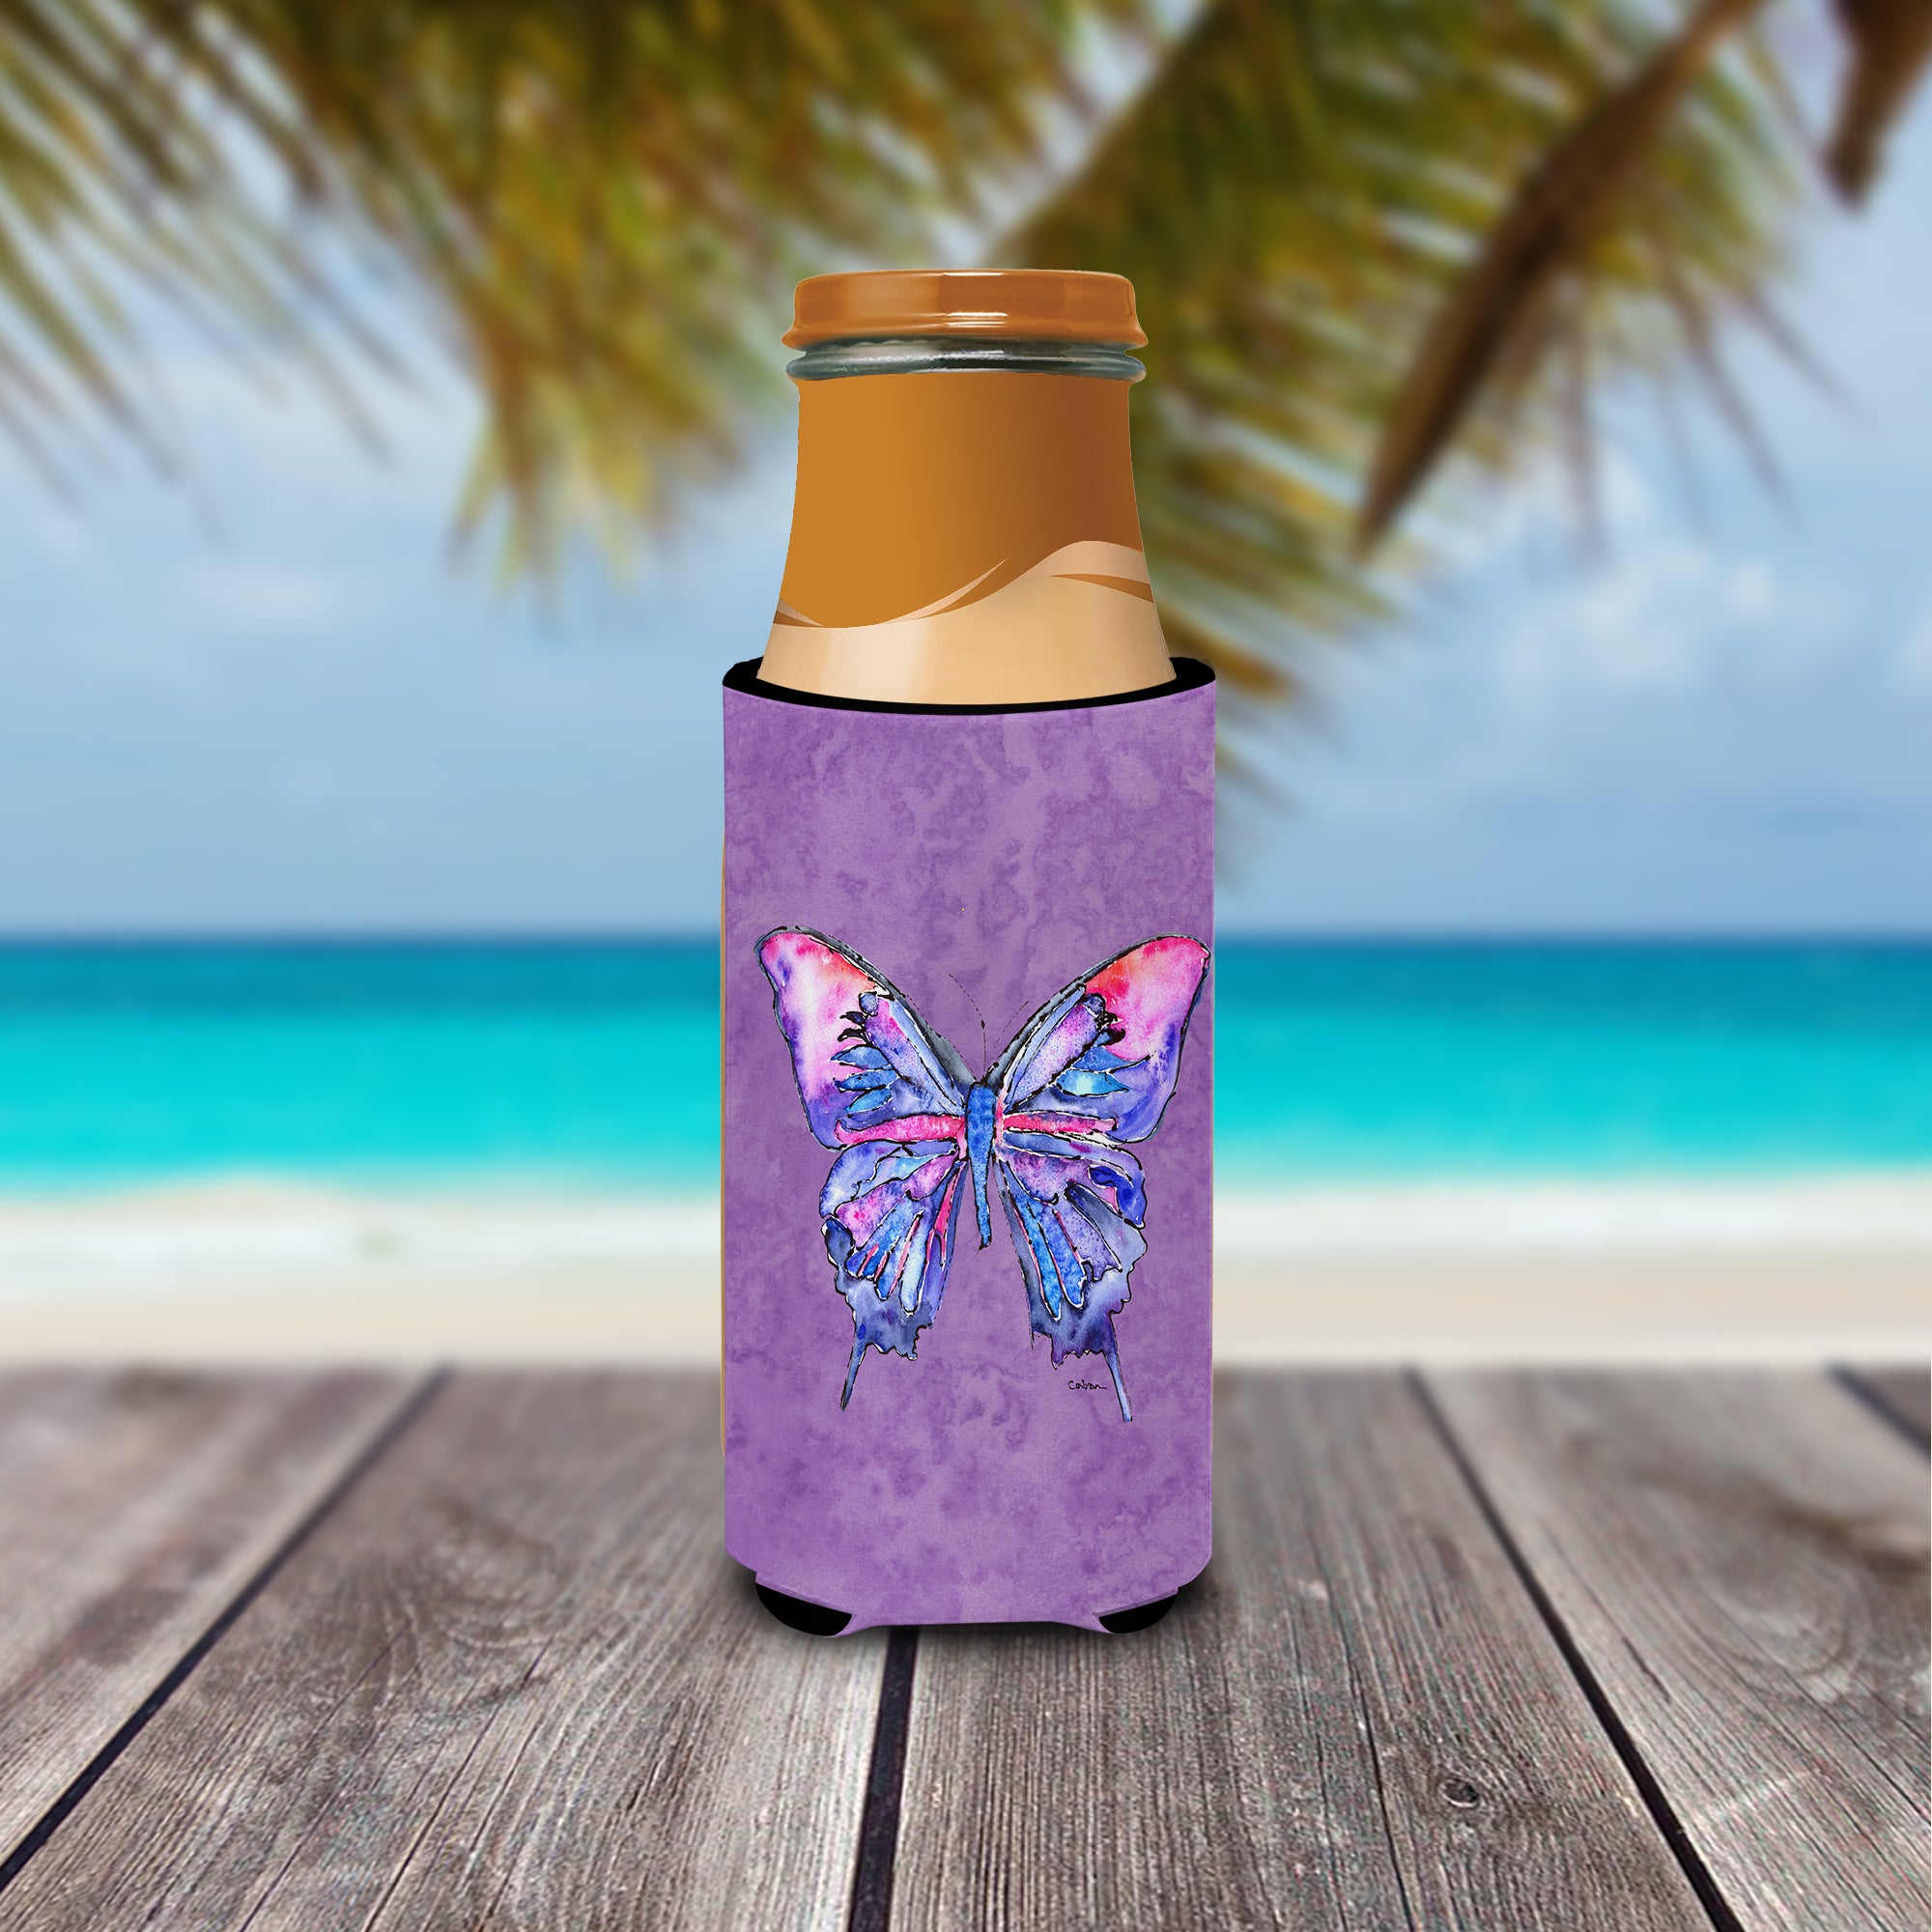 Butterfly on Purple Ultra Beverage Insulators for slim cans 8860MUK